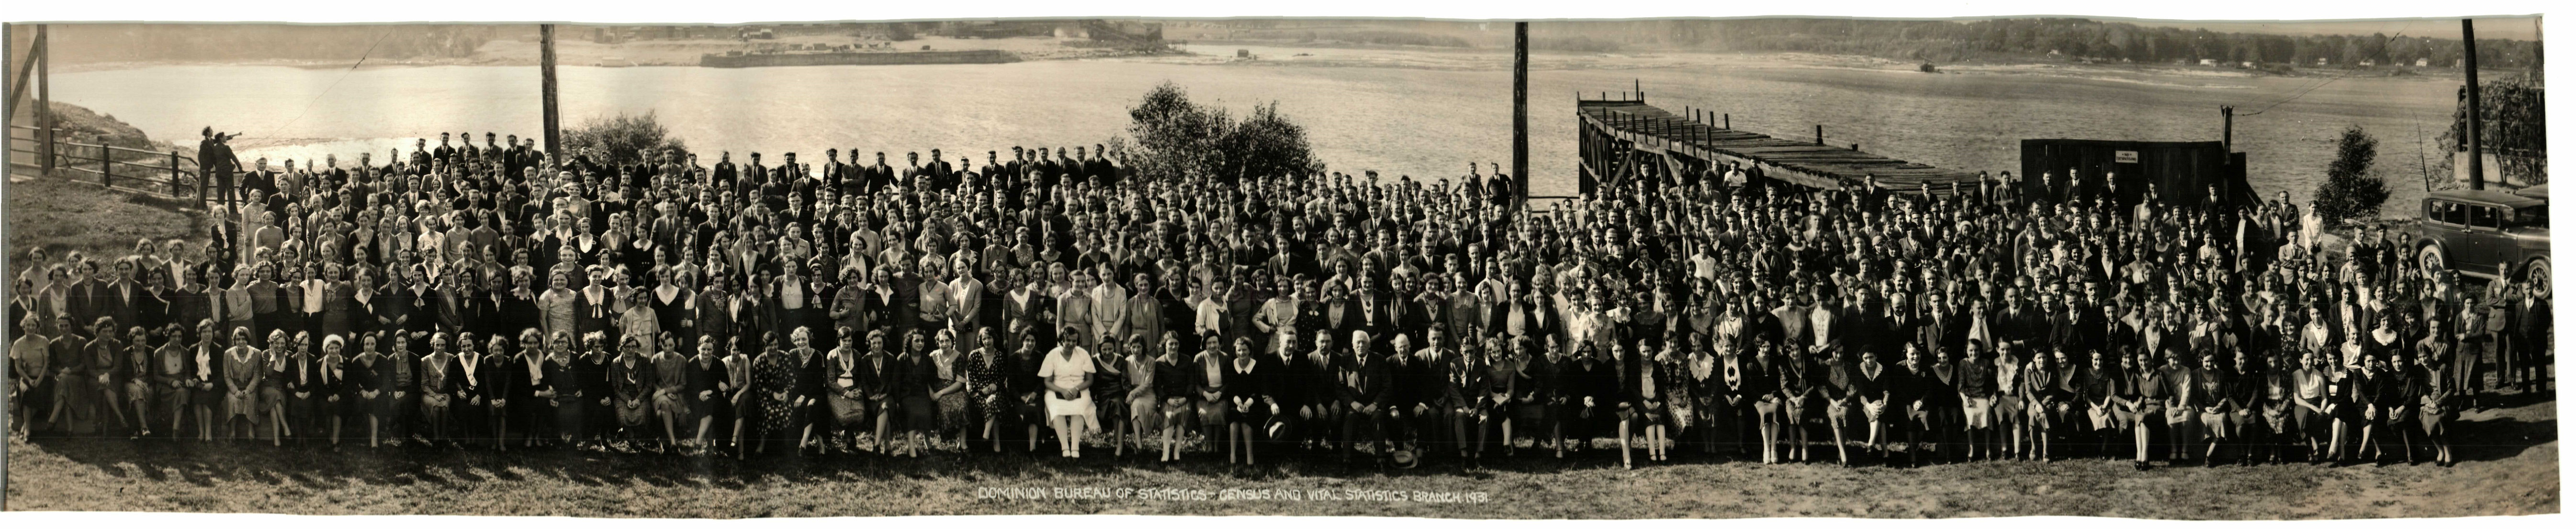 1931 Employees of the census and vital statistics branch  